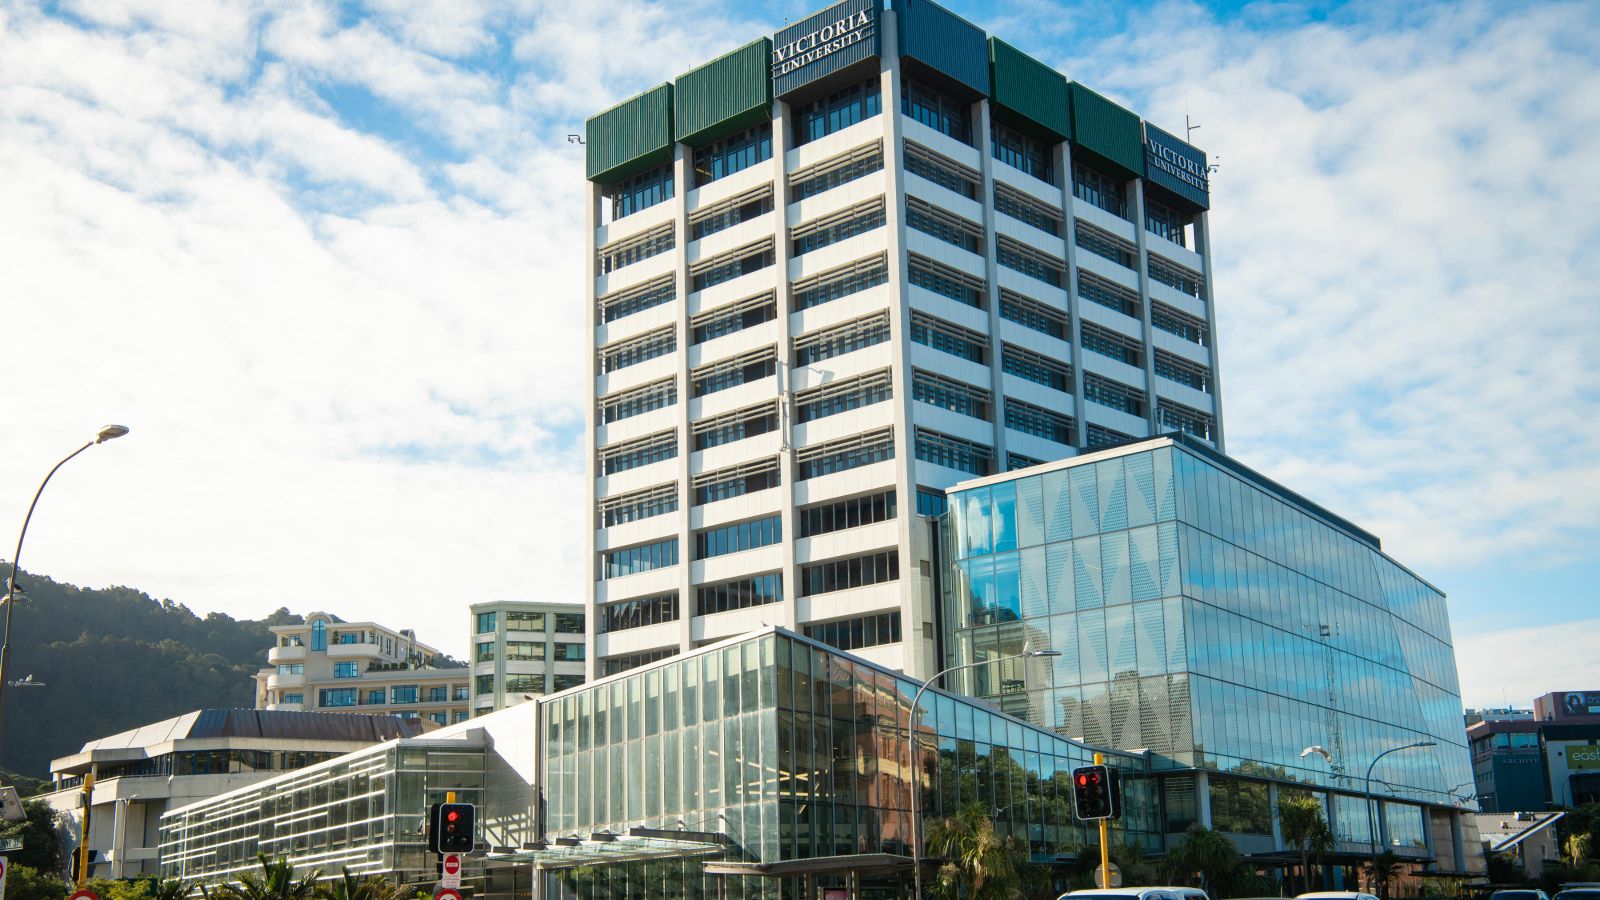 A view of Victoria University of Wellington's Rutherford House building from the street.